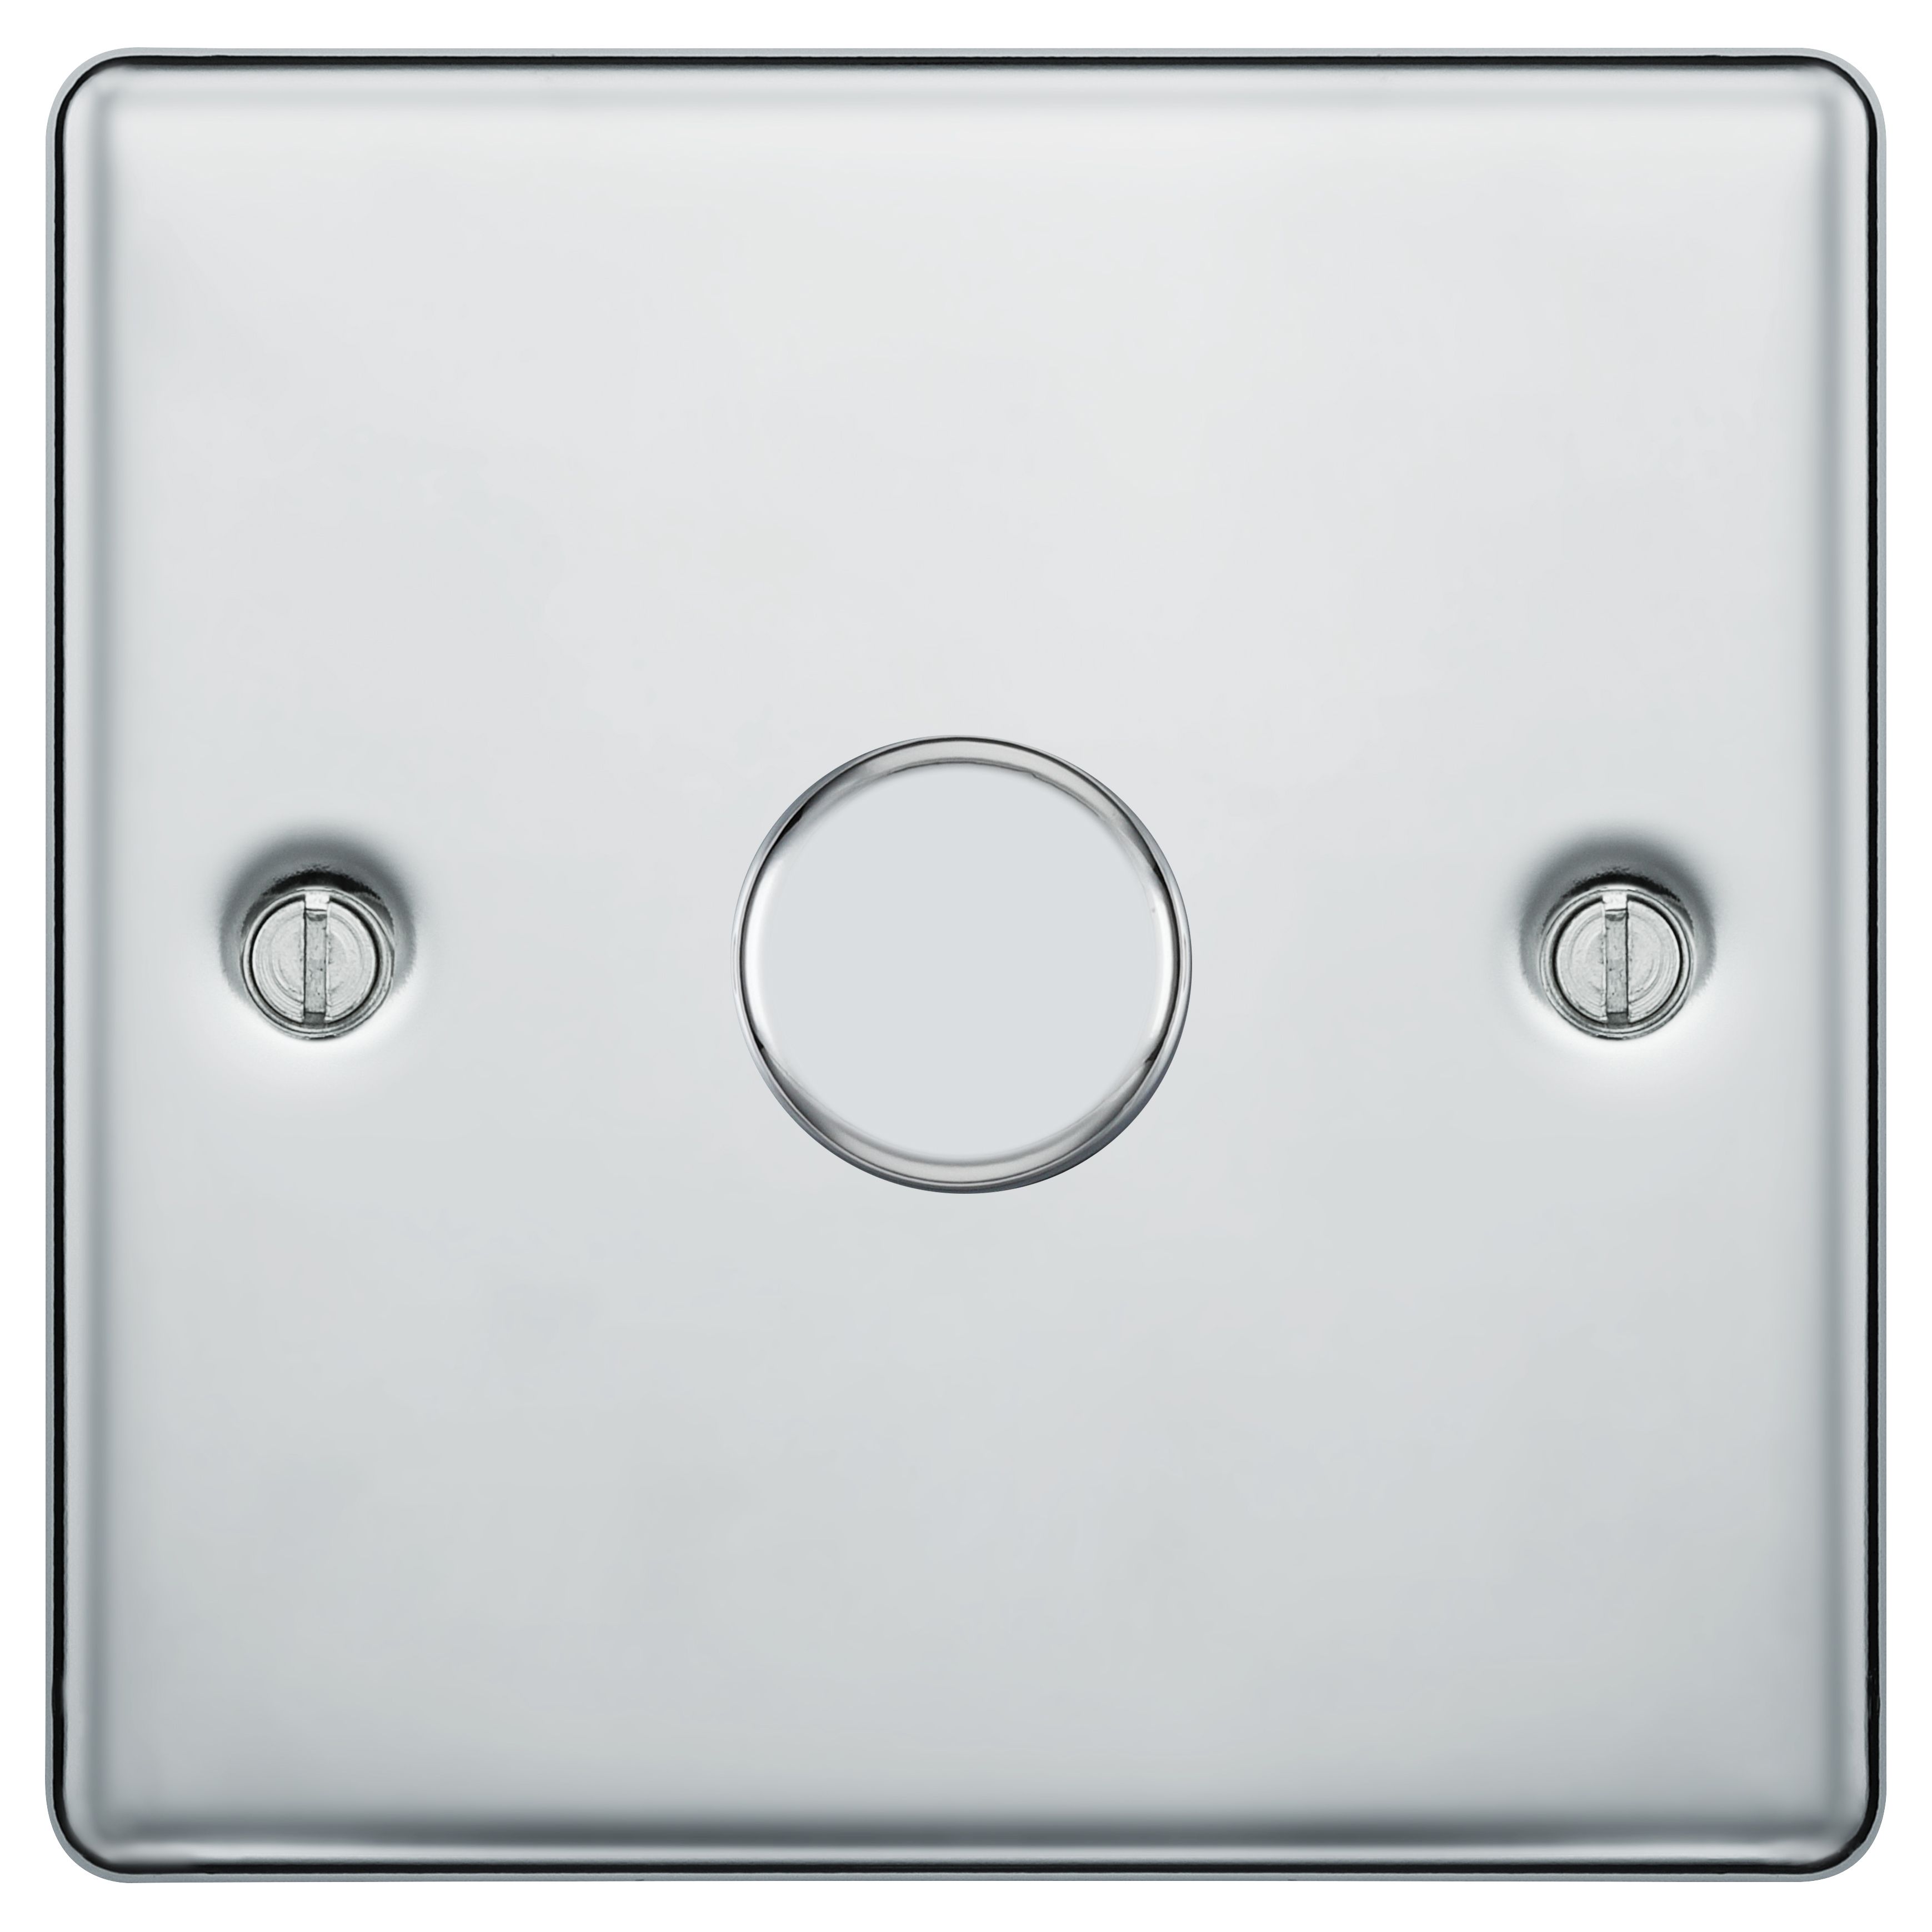 Image of BG 400W Screwed Raised Plate Single Dimmer Switch 2-Way Push On/Off - Polished Chrome